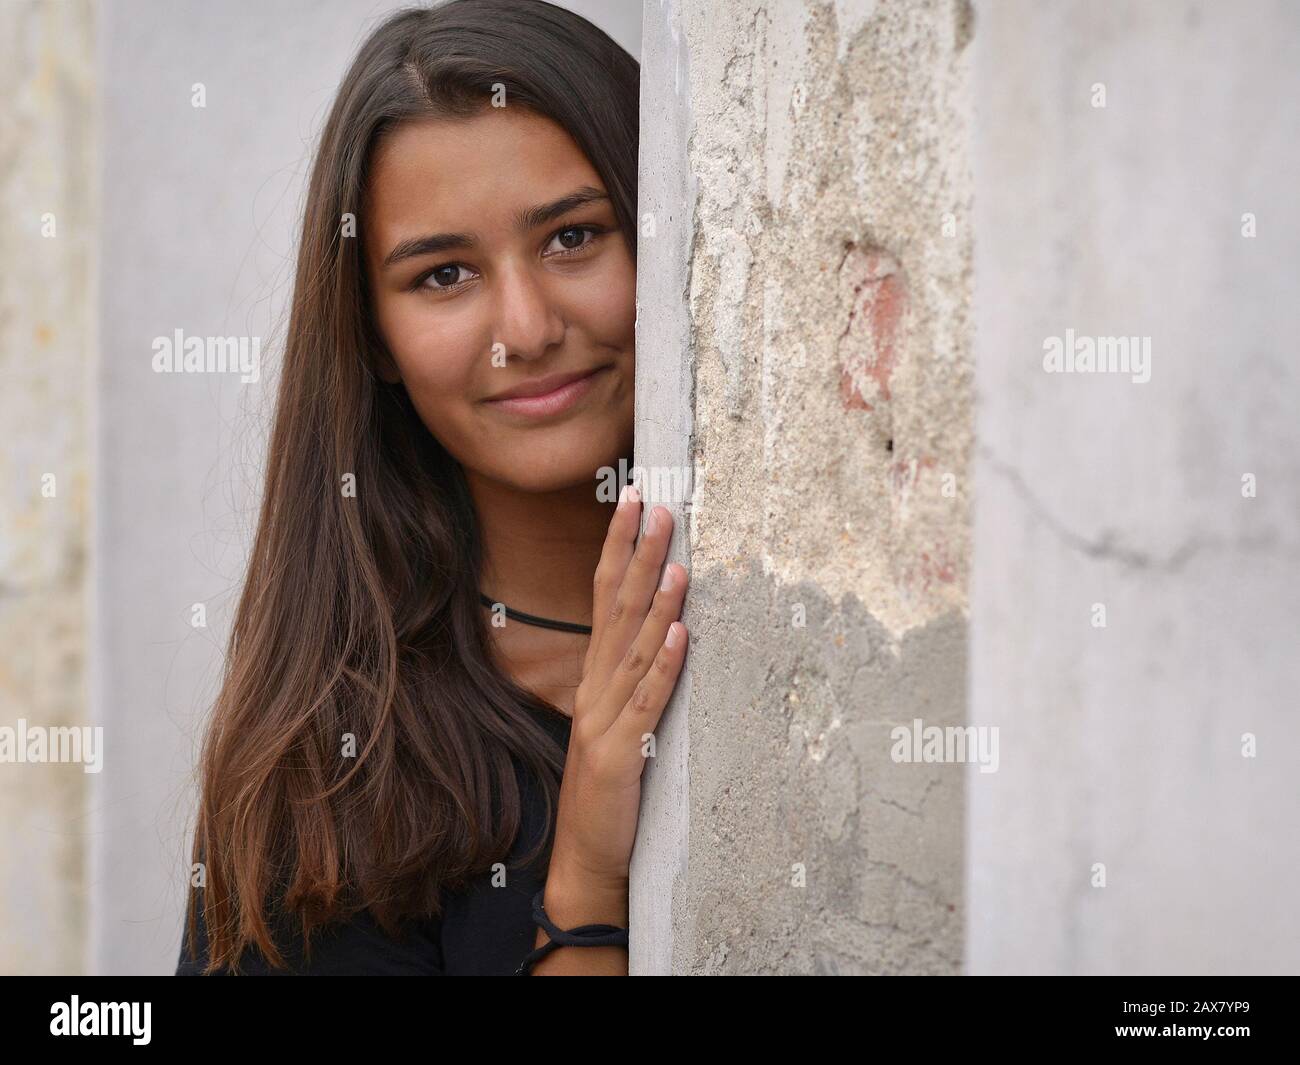 Young woman with beautiful hair looks around the corner of an old house. Stock Photo